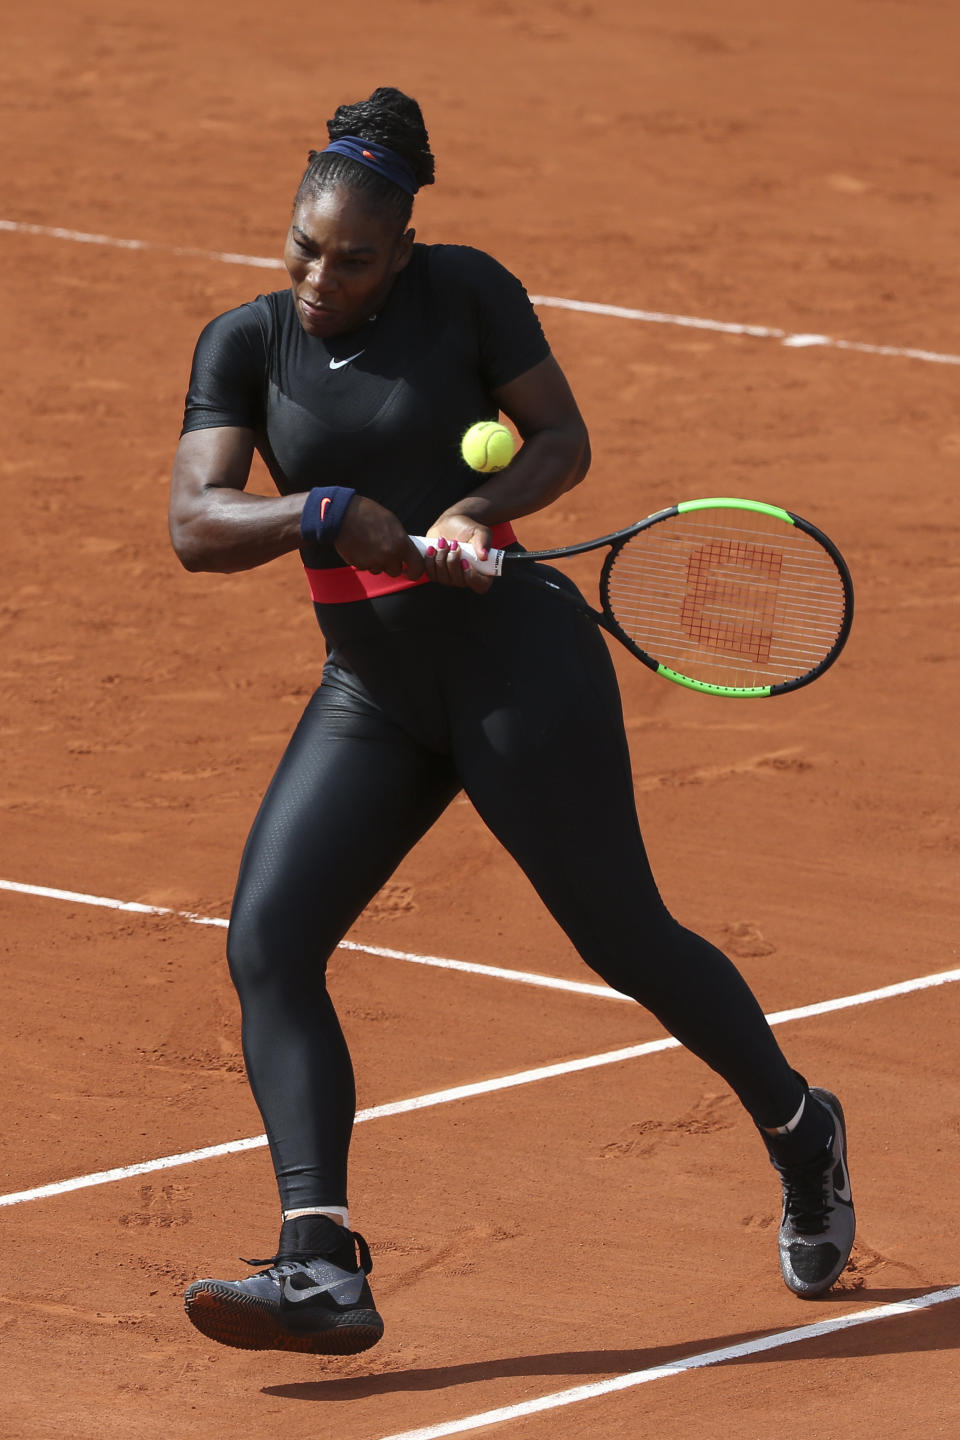 Williams at the French Open at Roland Garros Stadium on June 3 in Paris.&nbsp;She was barred from wearing the catsuit again at the tournament but will be able to play in it next year&nbsp;in Women&rsquo;s Tennis Association matches. (Photo: Jean Catuffe via Getty Images)